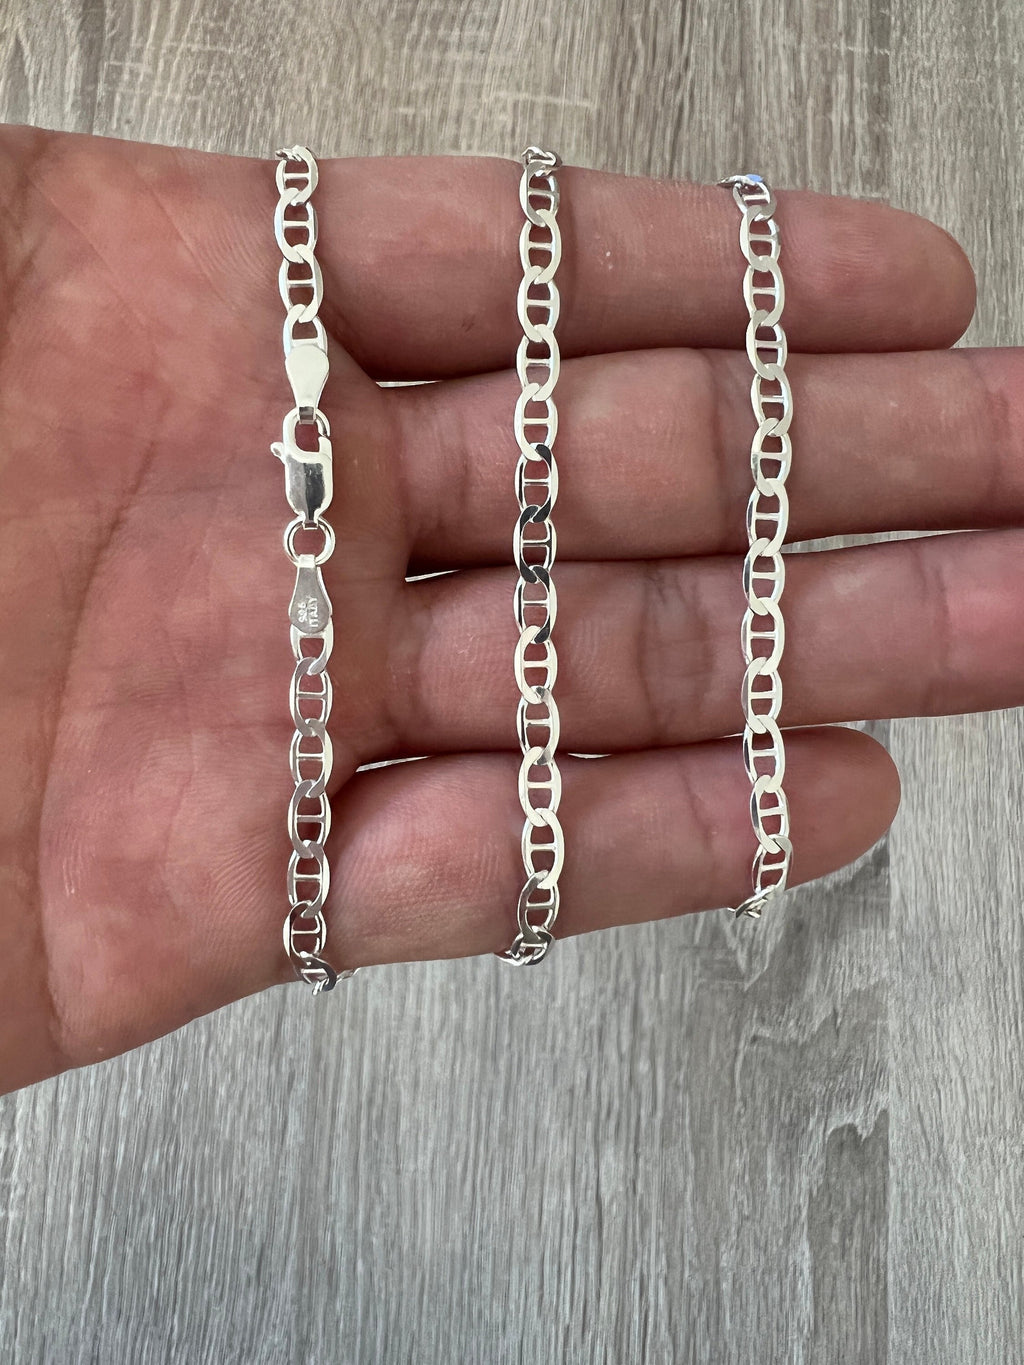 4mm 925 Silver Rope Chain Necklace Sterling Silver 16 18 20 22 24